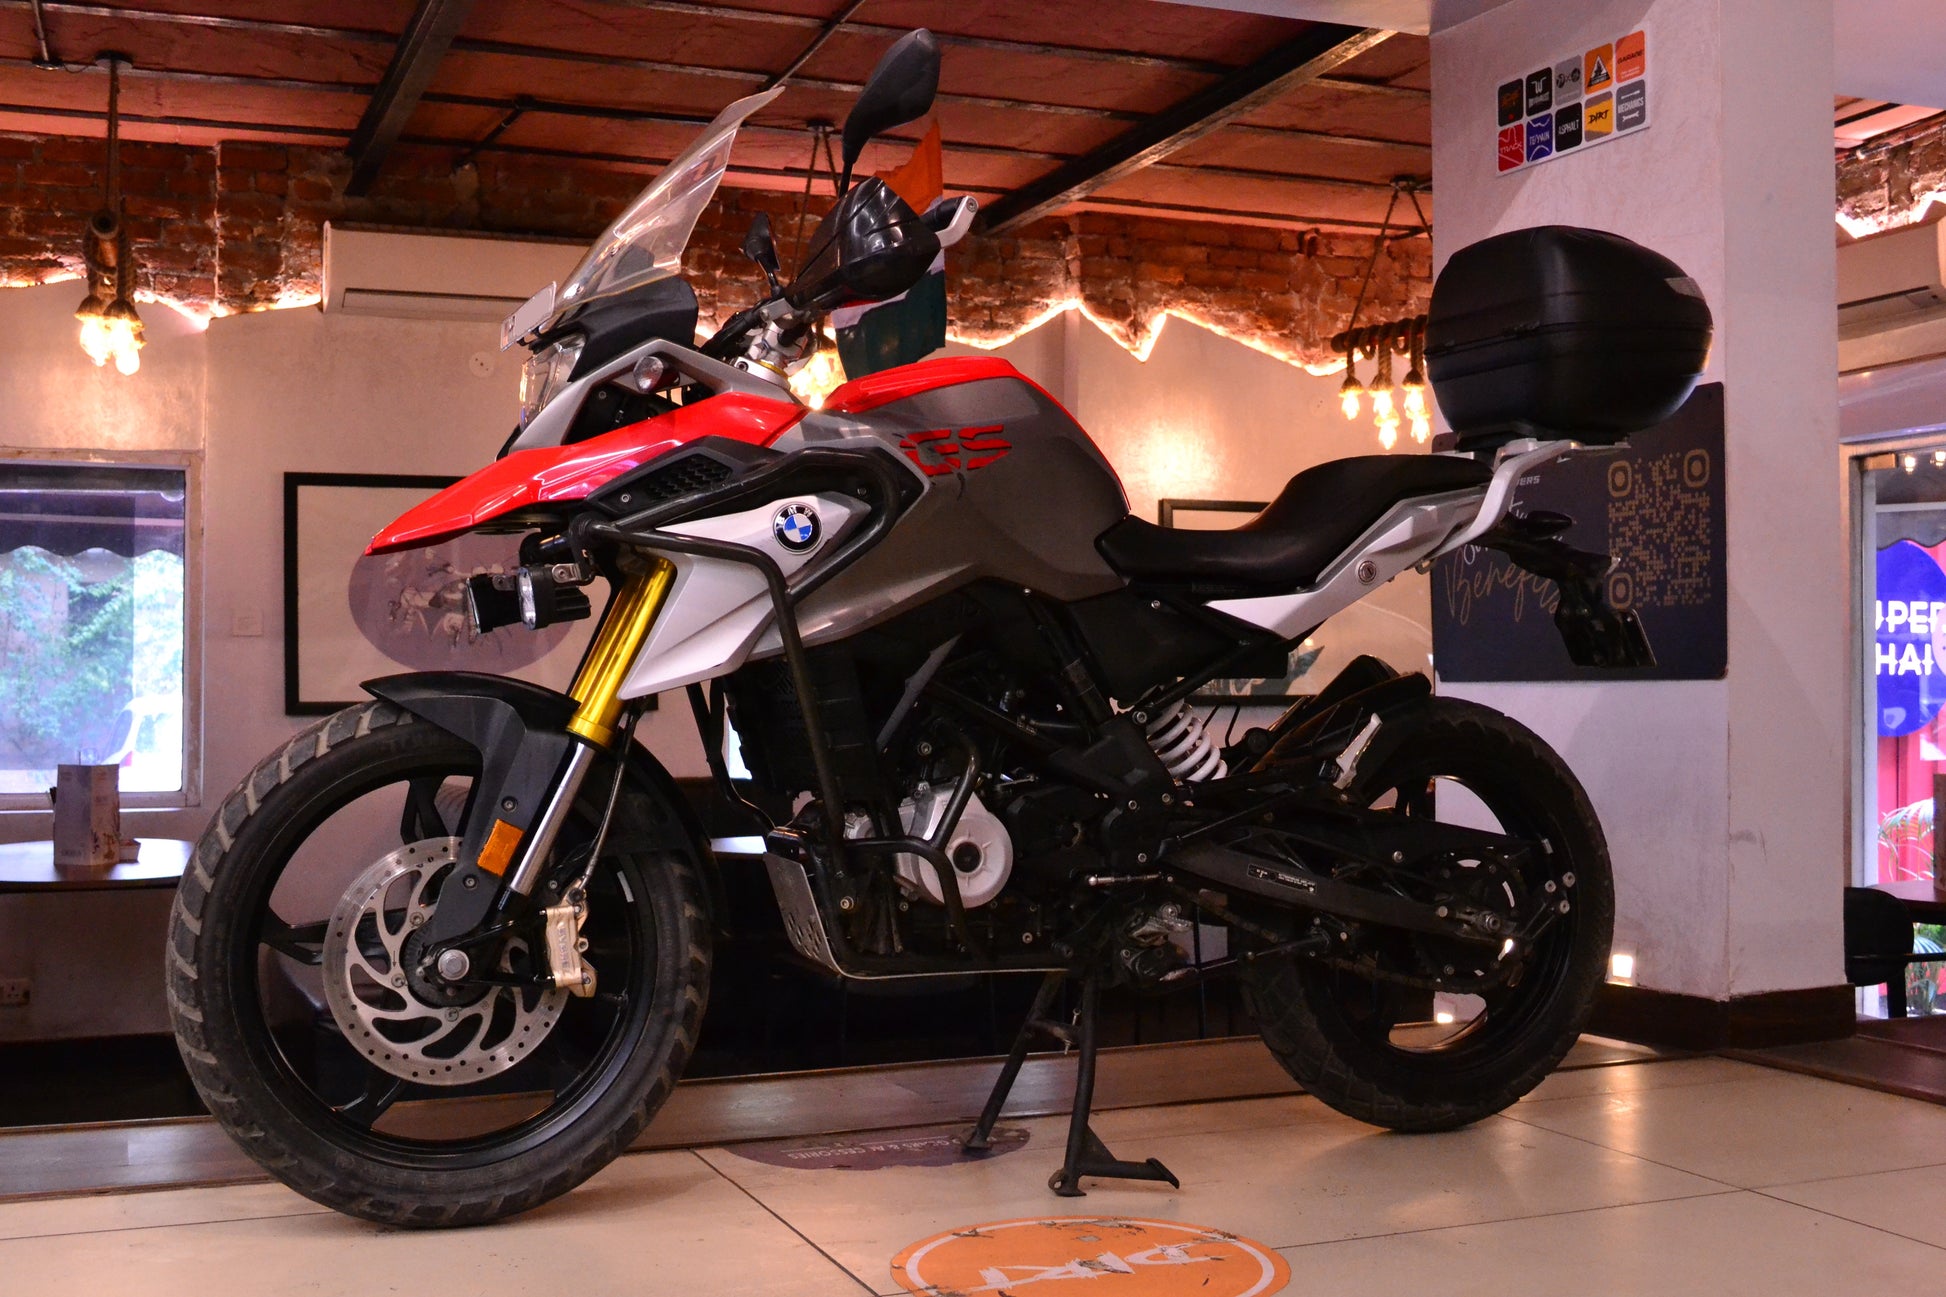 BMW G310 GS 2019 HR Registered For Sale Pathpavers Garage